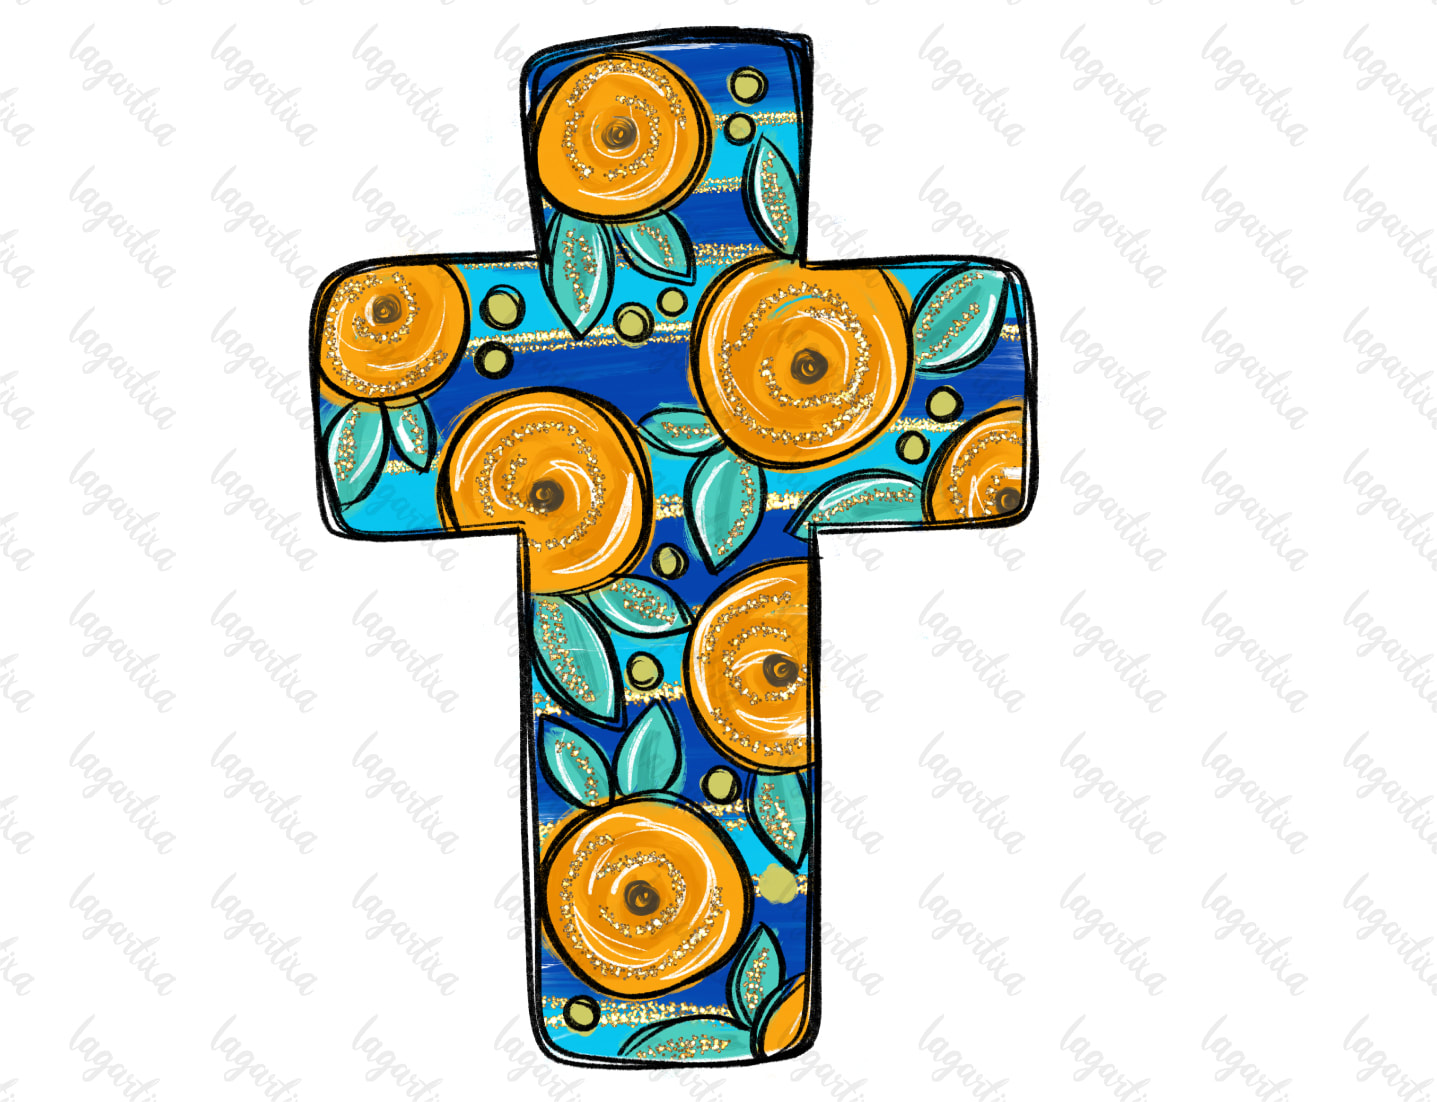 stained glass cross clip art